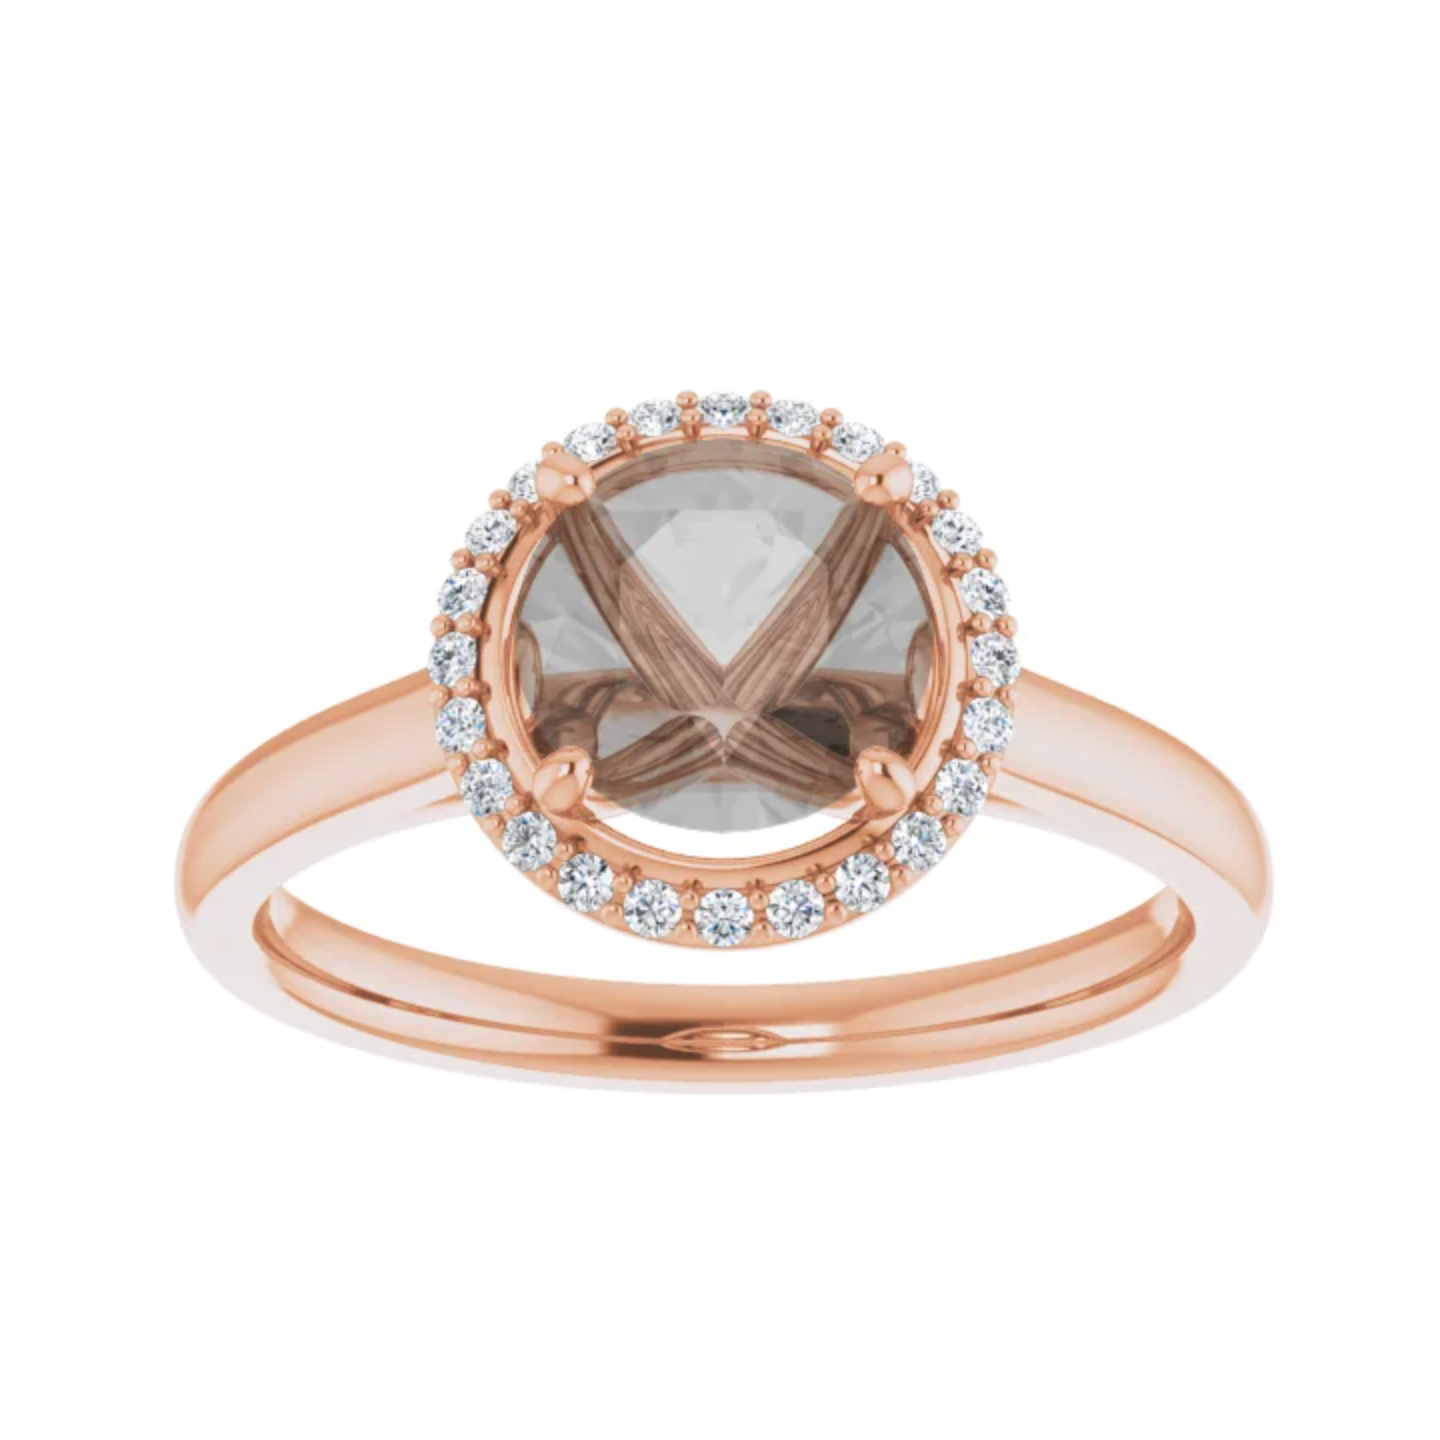 Lydia Setting - Midwinter Co. Alternative Bridal Rings and Modern Fine Jewelry